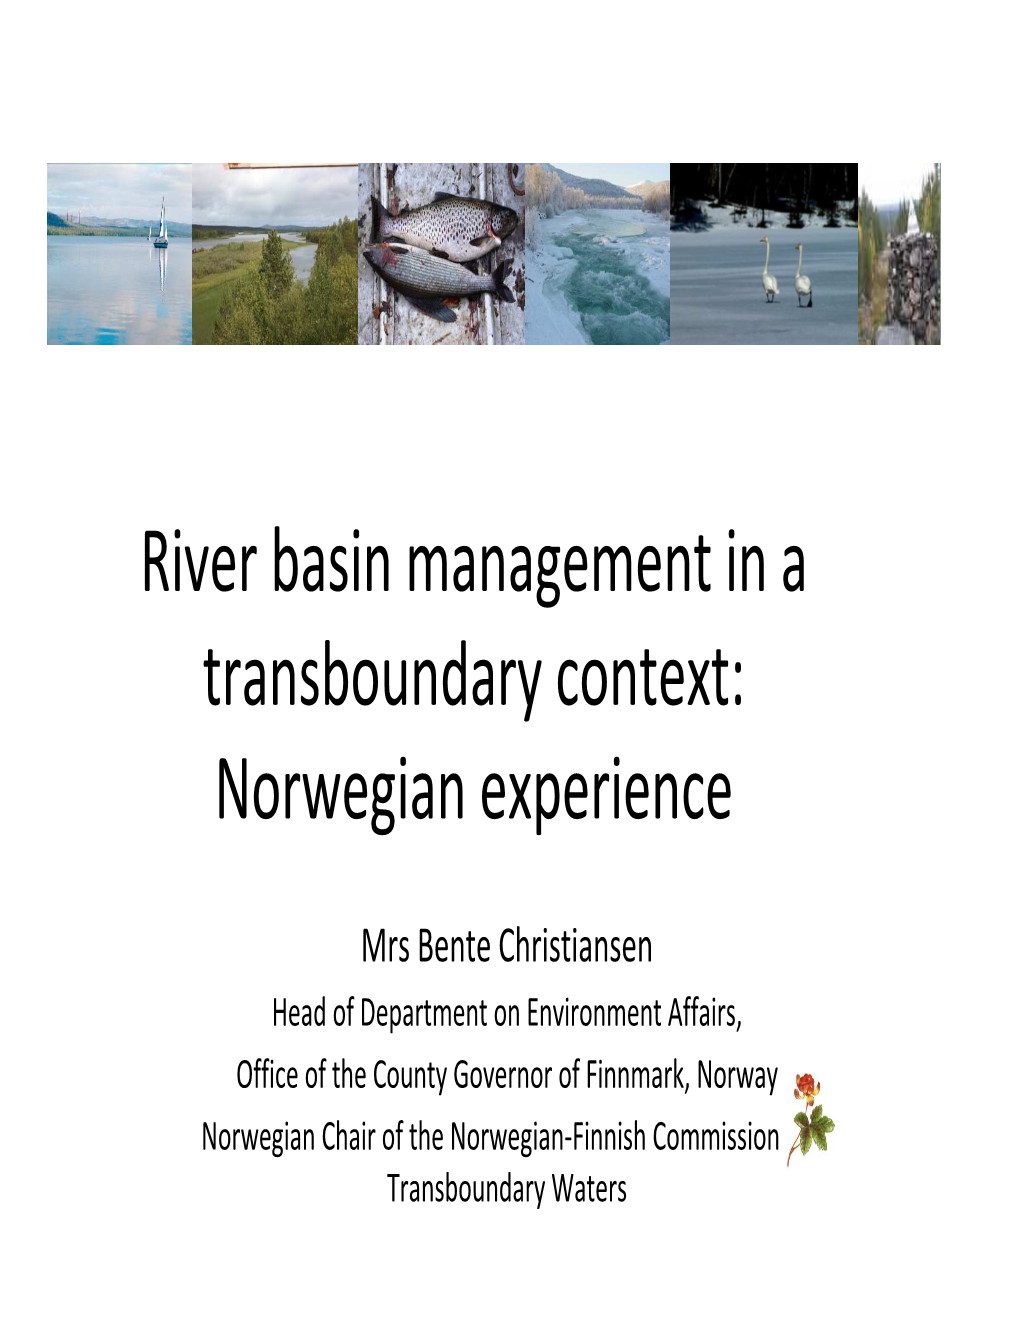 River Basin Management in a Transboundary Context: Norwegian Experience